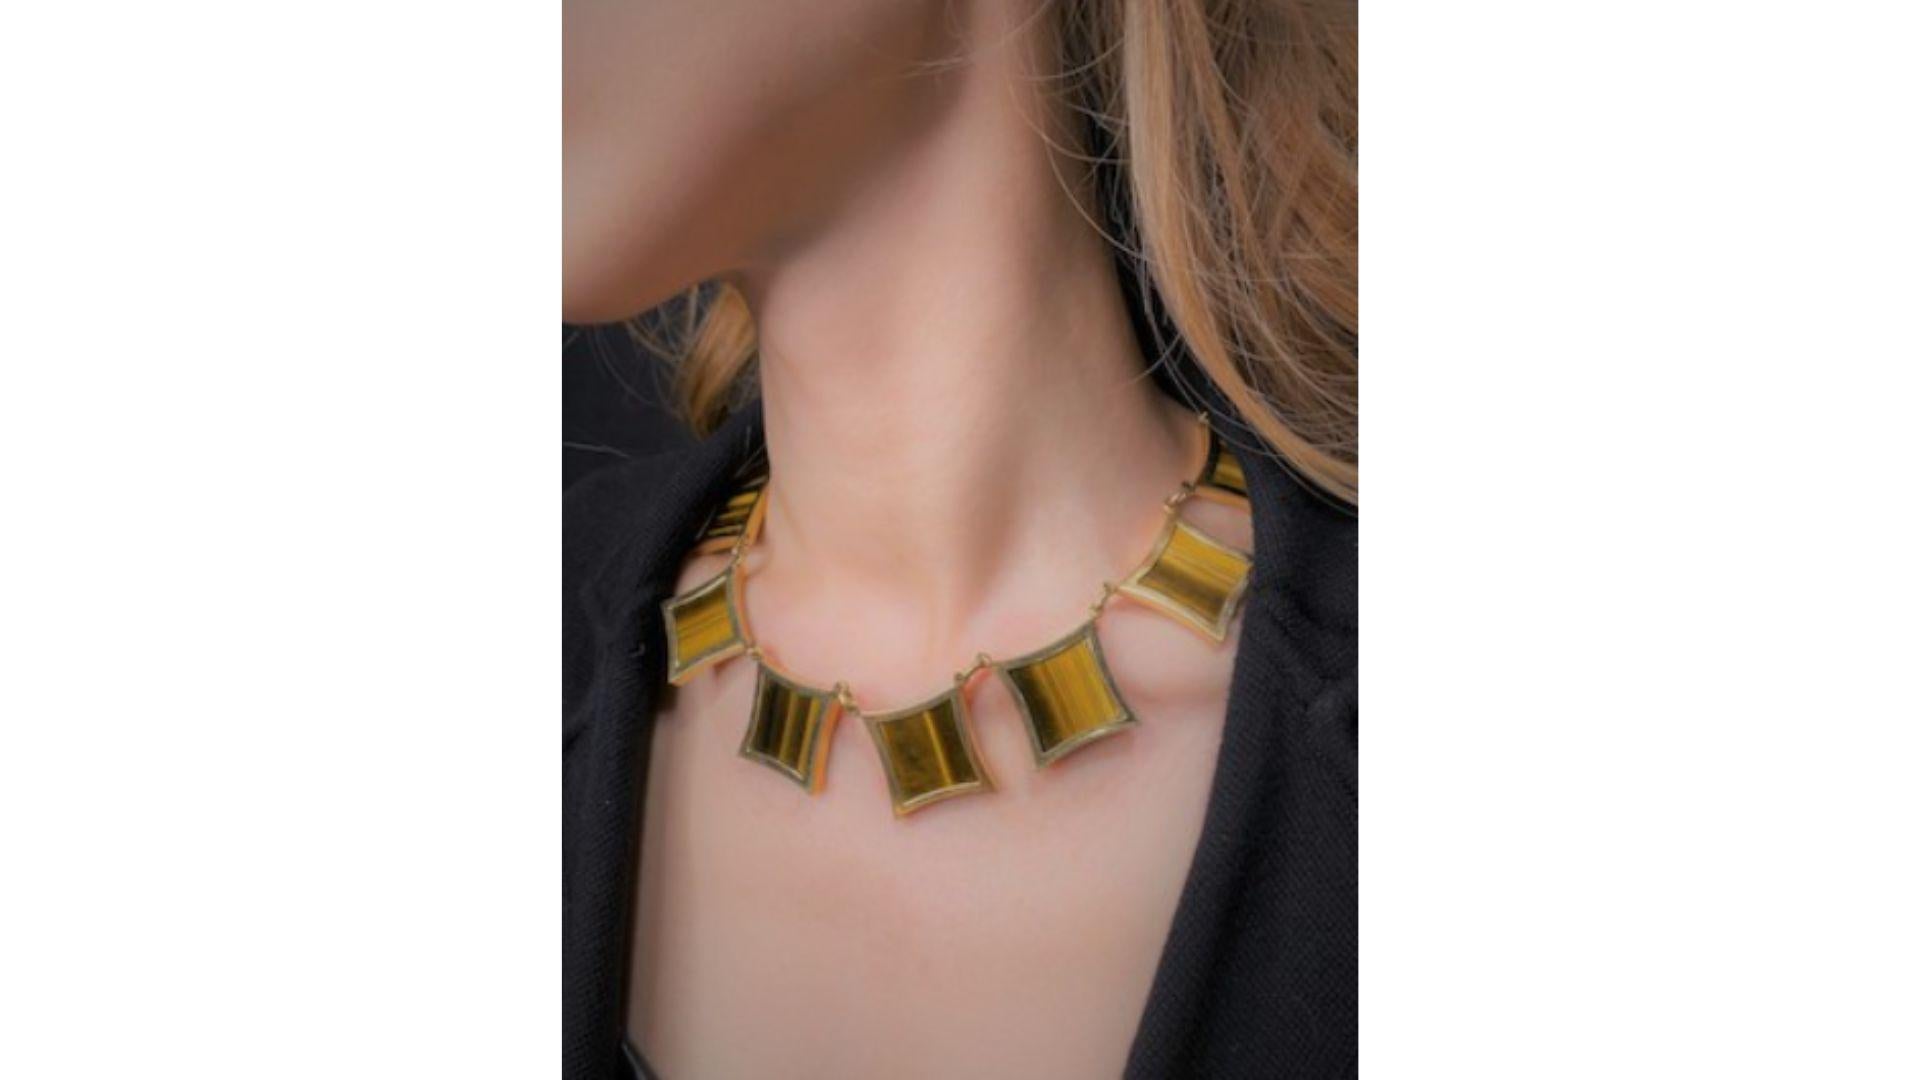 Tiger's Eye Quartz and 18K Gold Necklace by G. Vascellari. 

The front suspending eight tiger's eye quartz tablets, completed by a solid gold curb chain, signed by the prominent designer, G. Vascellari. The necklace dates circa 1970 and the chain